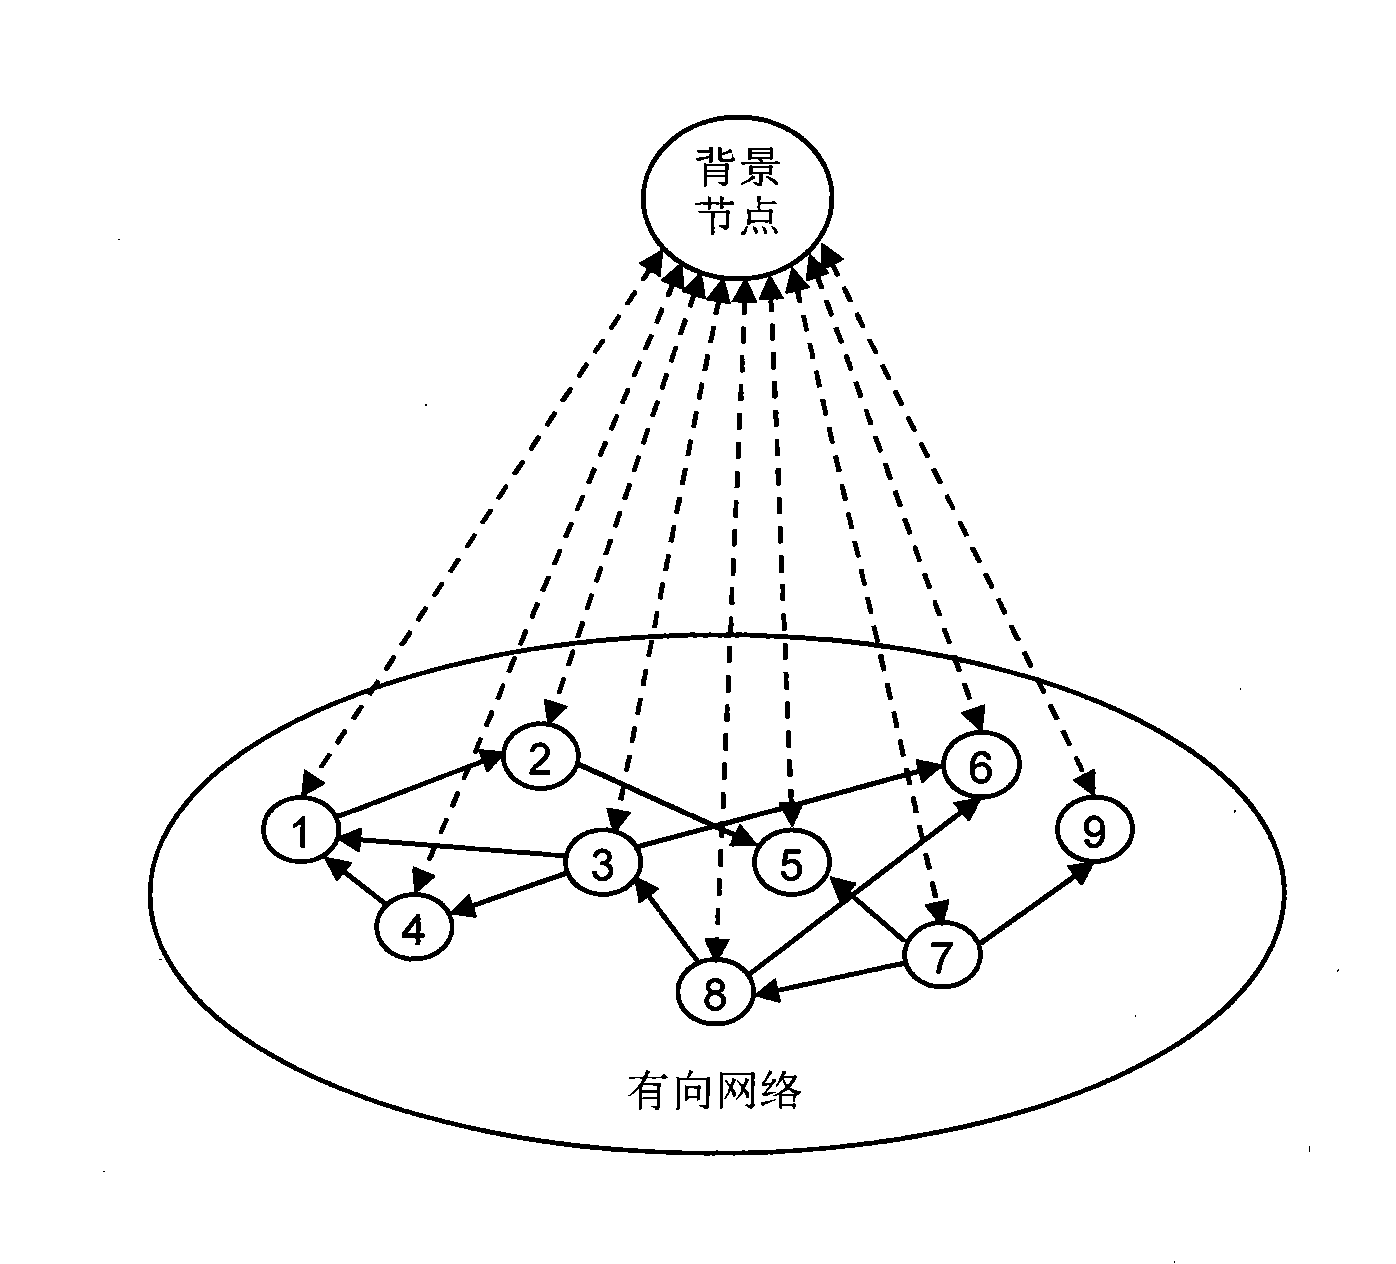 Sequencing method of node importance in network